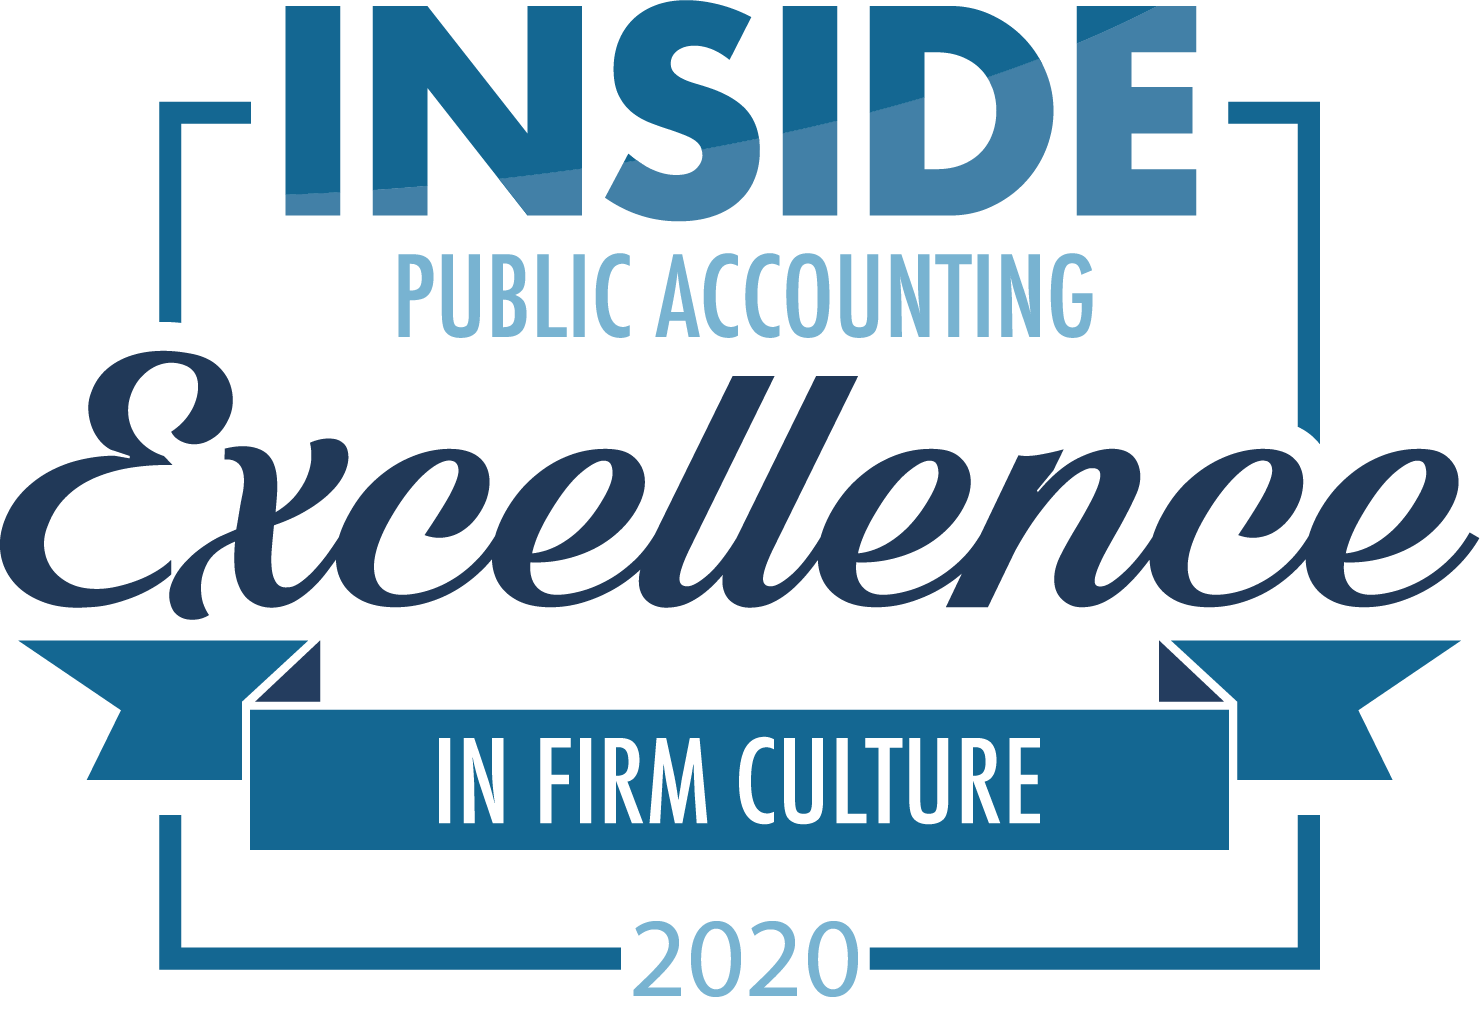 inside public accounting excellence in firm culture 2020 title - Richey May winner